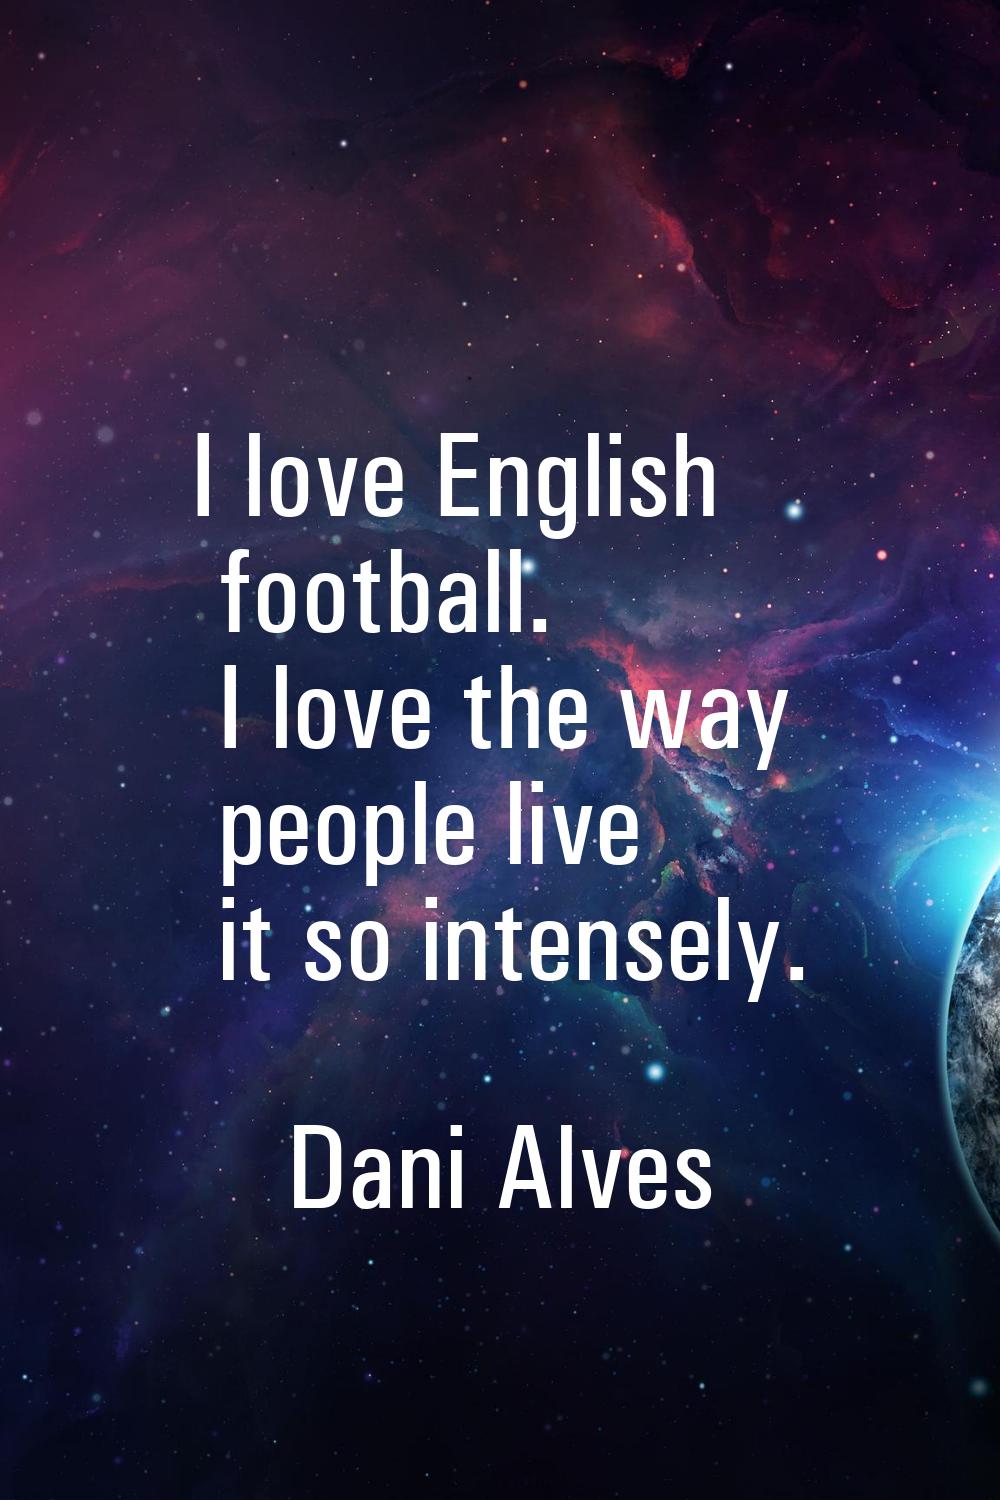 I love English football. I love the way people live it so intensely.